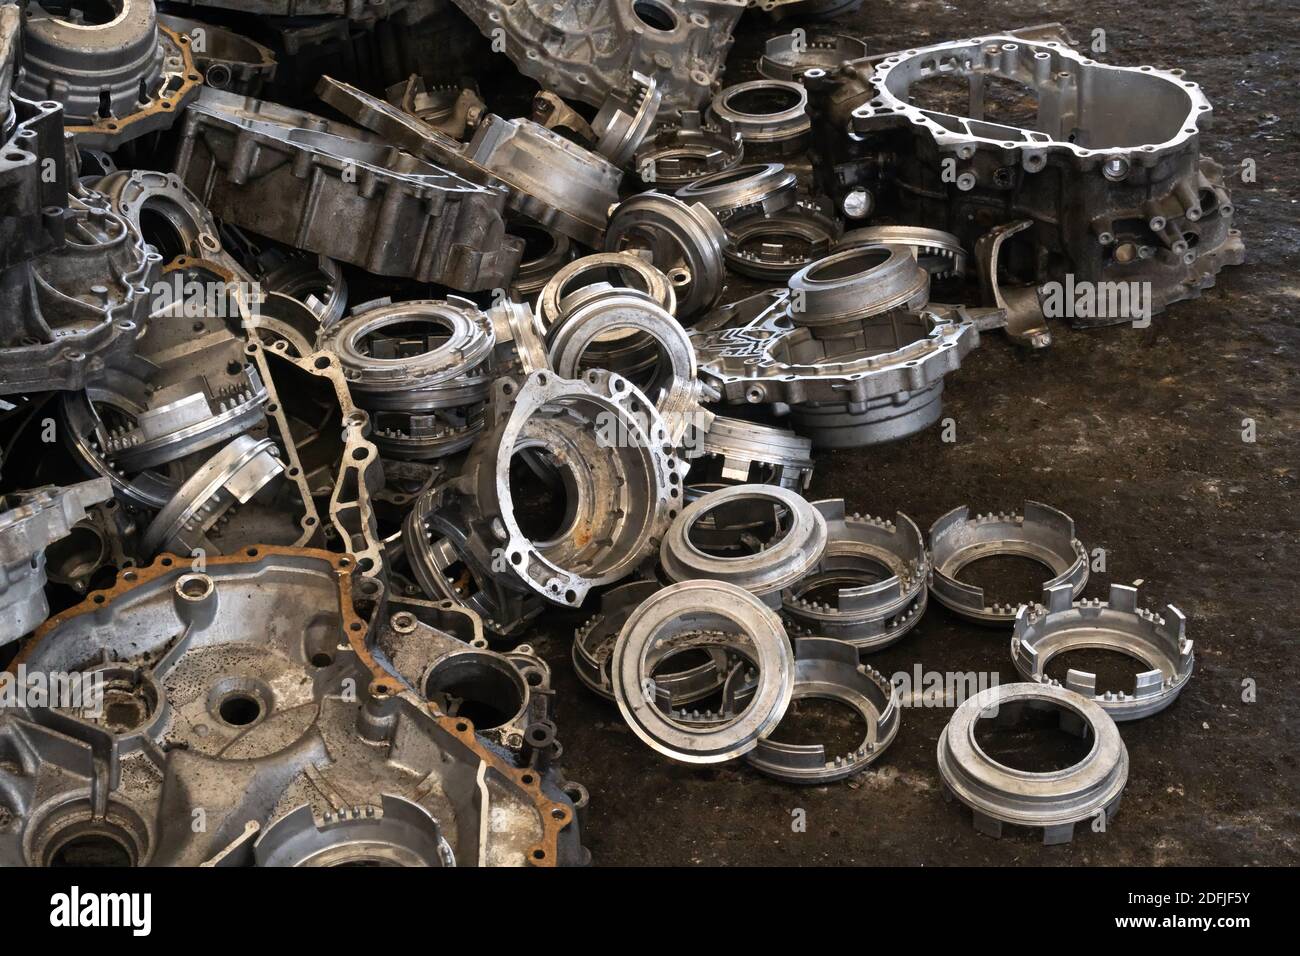 Aluminum engines, gearbox and transmission parts for recycling. Scrap engines parts for recycling. Stock Photo